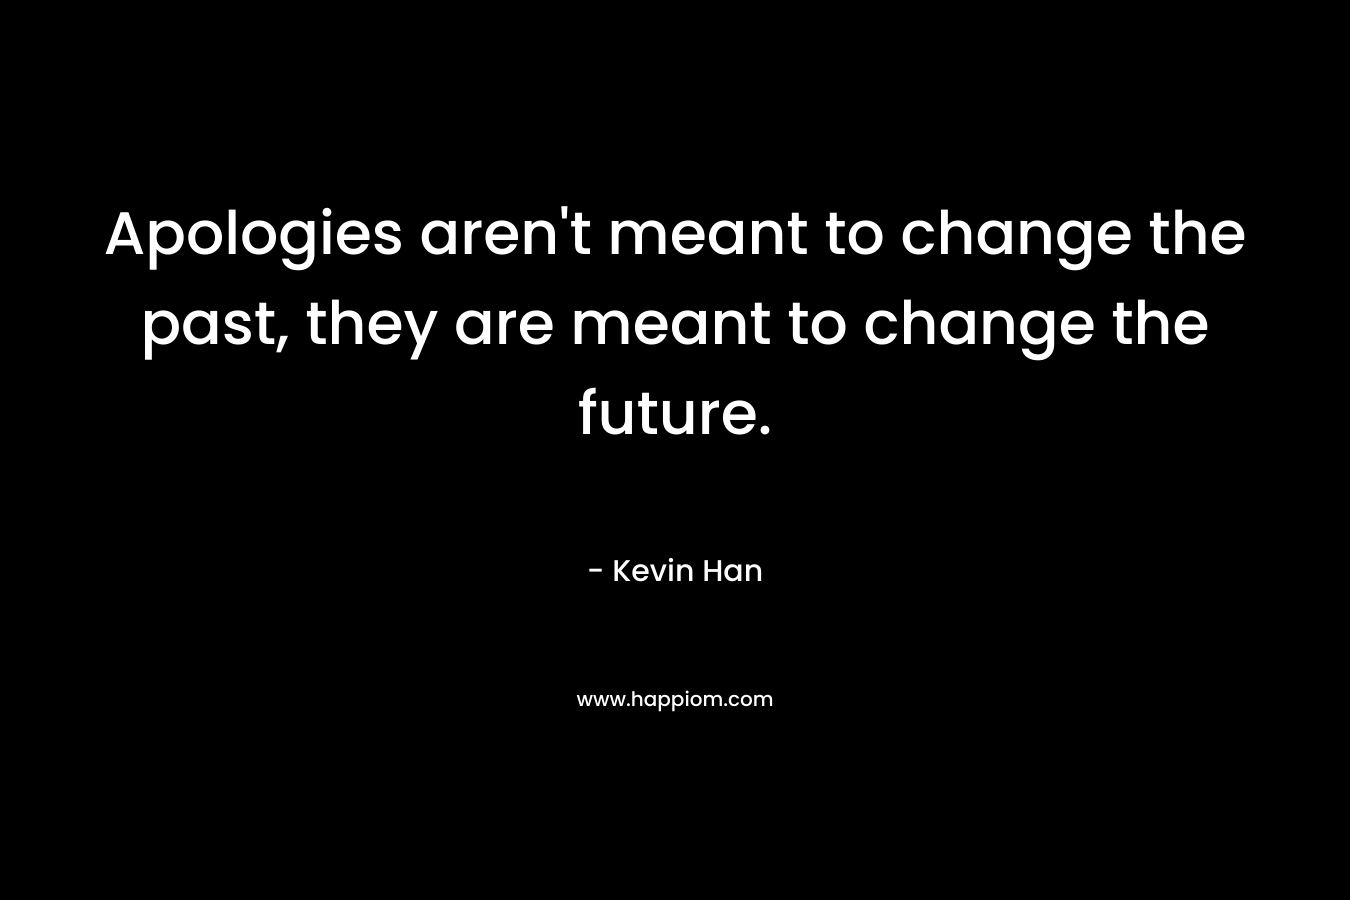 Apologies aren't meant to change the past, they are meant to change the future.